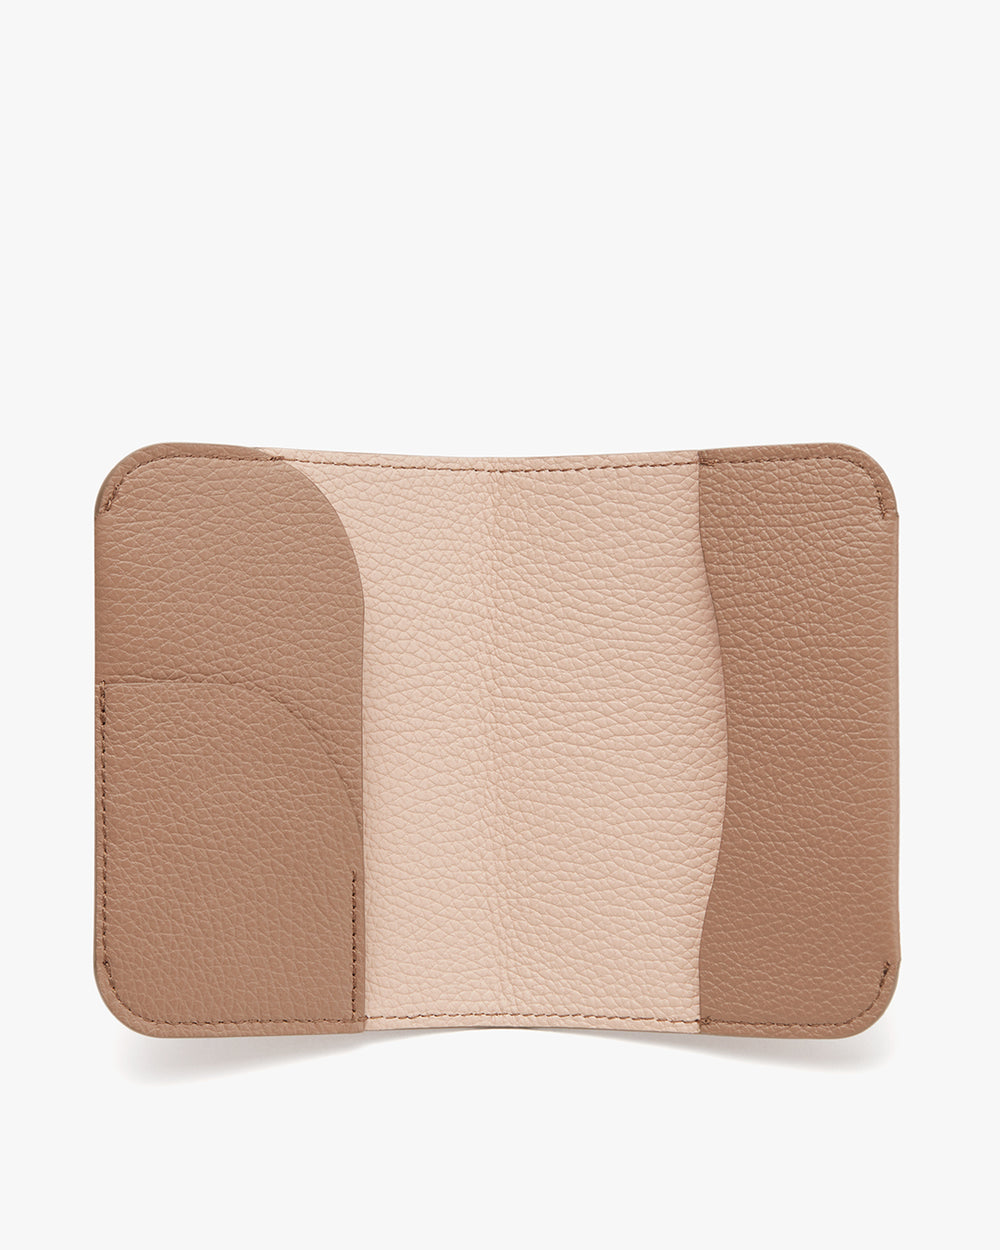 Open wallet displaying interior with multiple pockets.